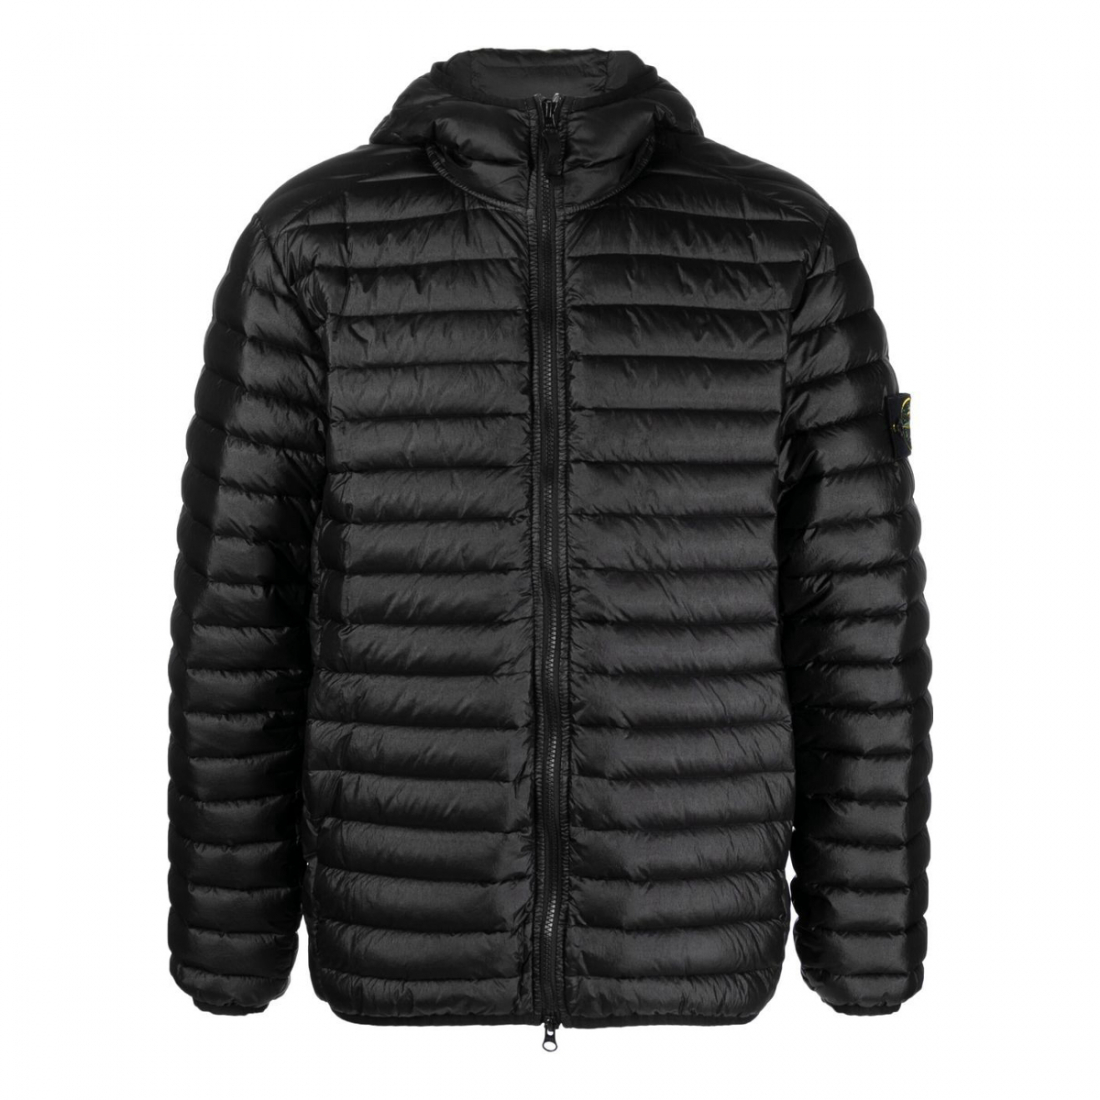 Men's 'Compass' Padded Jacket